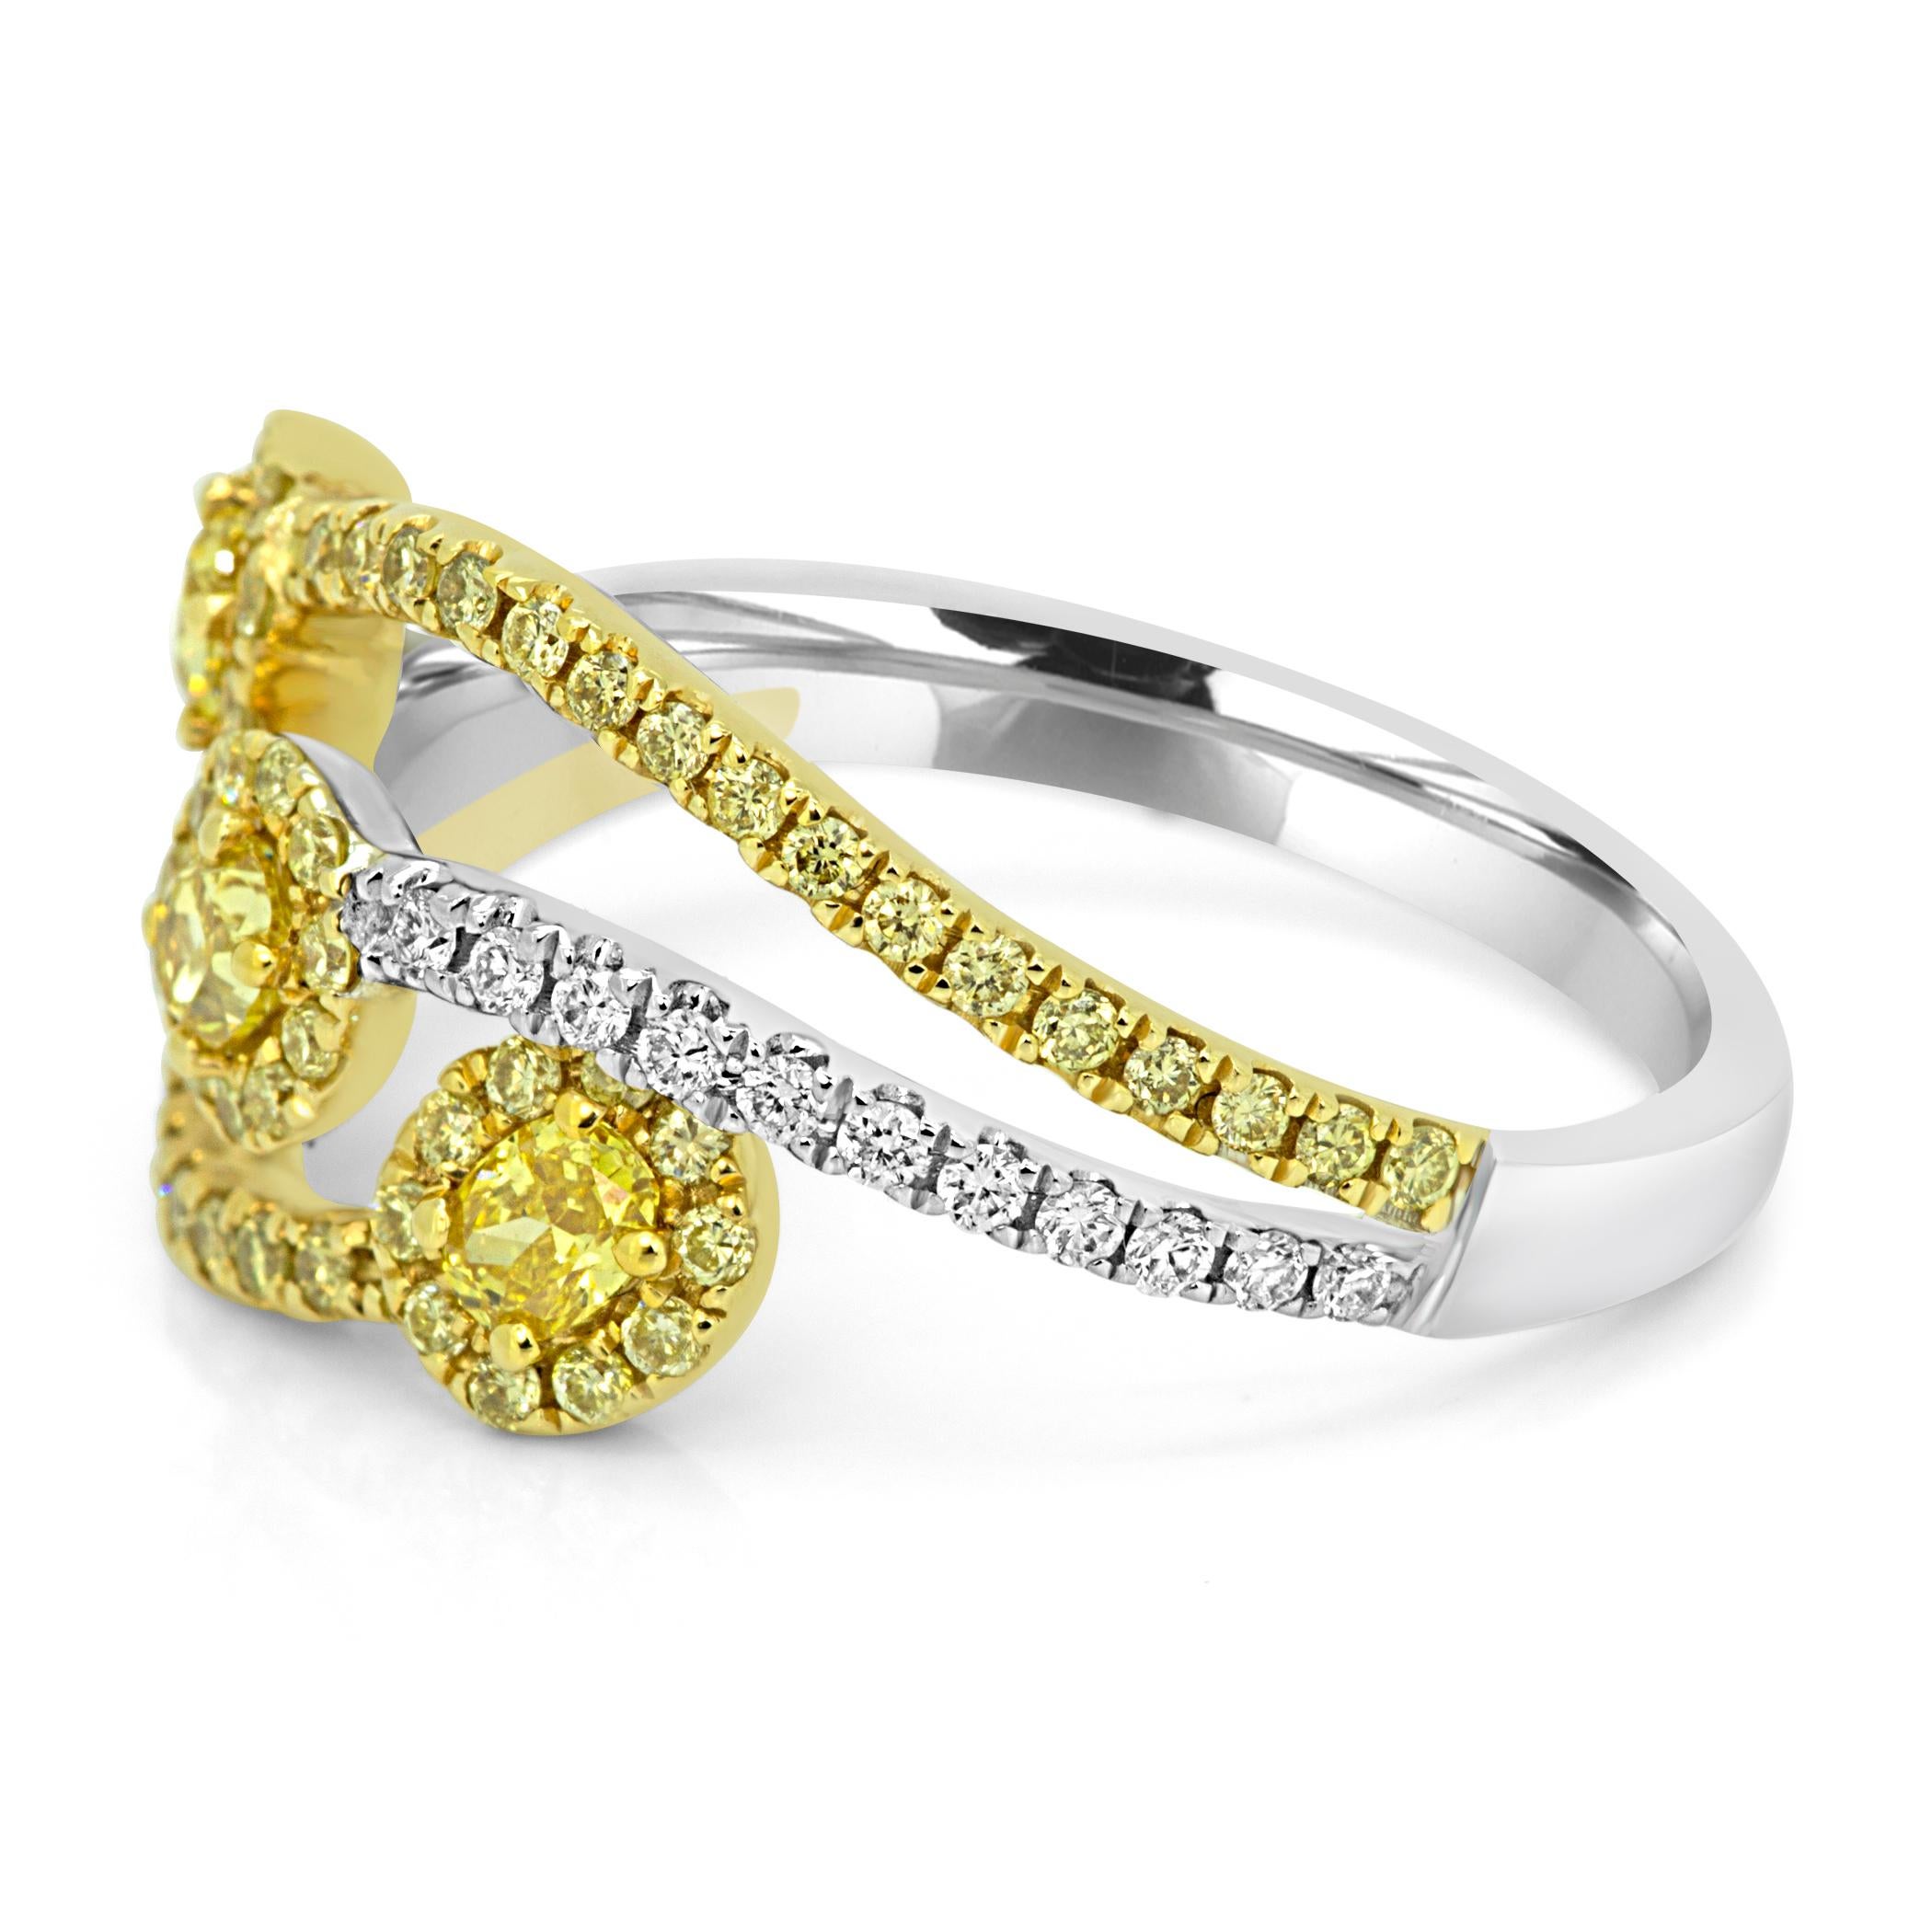 3 Natural Fancy Vivid Yellow Oval Diamond 0.32 Carat Encircled in single Halo of Natural Fancy Yellow Round Diamond 0.32 Carat and Natural White Diamond on the Sides 0.13 Carat in 14K White and Yellow Gold Stunning Fashion Cocktail Ring.

Style